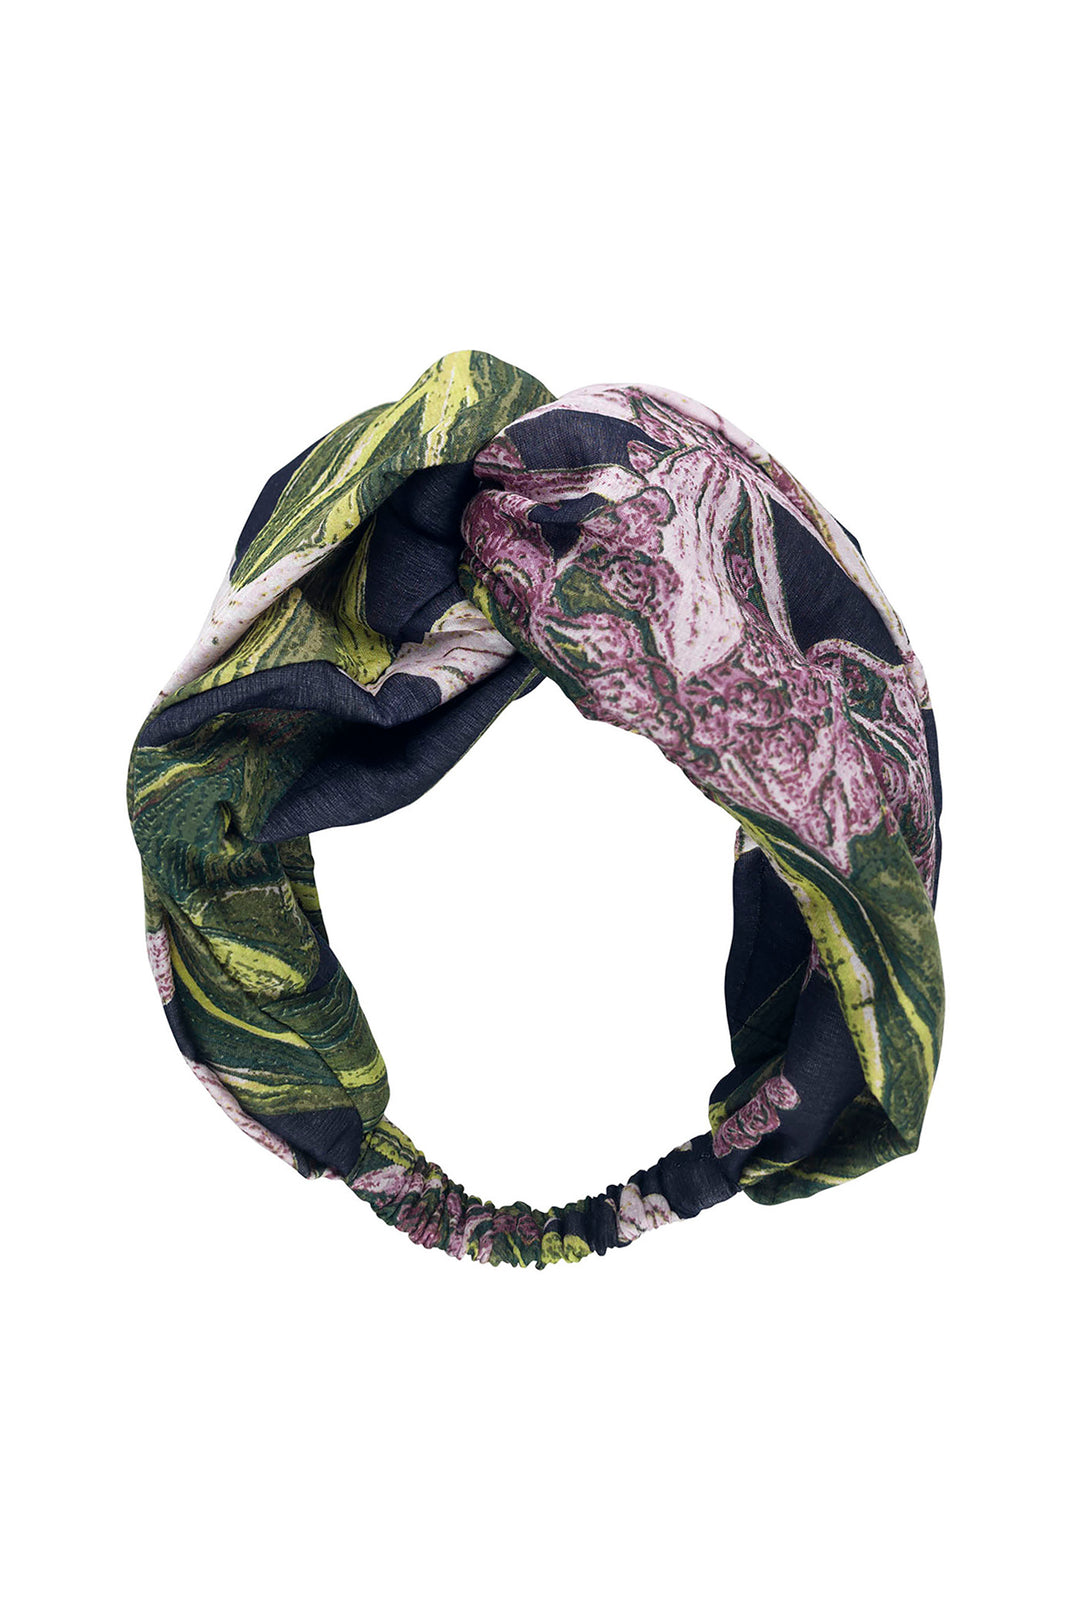 Marianne North Medinilla Headband- Our headbands are made from 100% recycled material using offcuts from our clothing production.